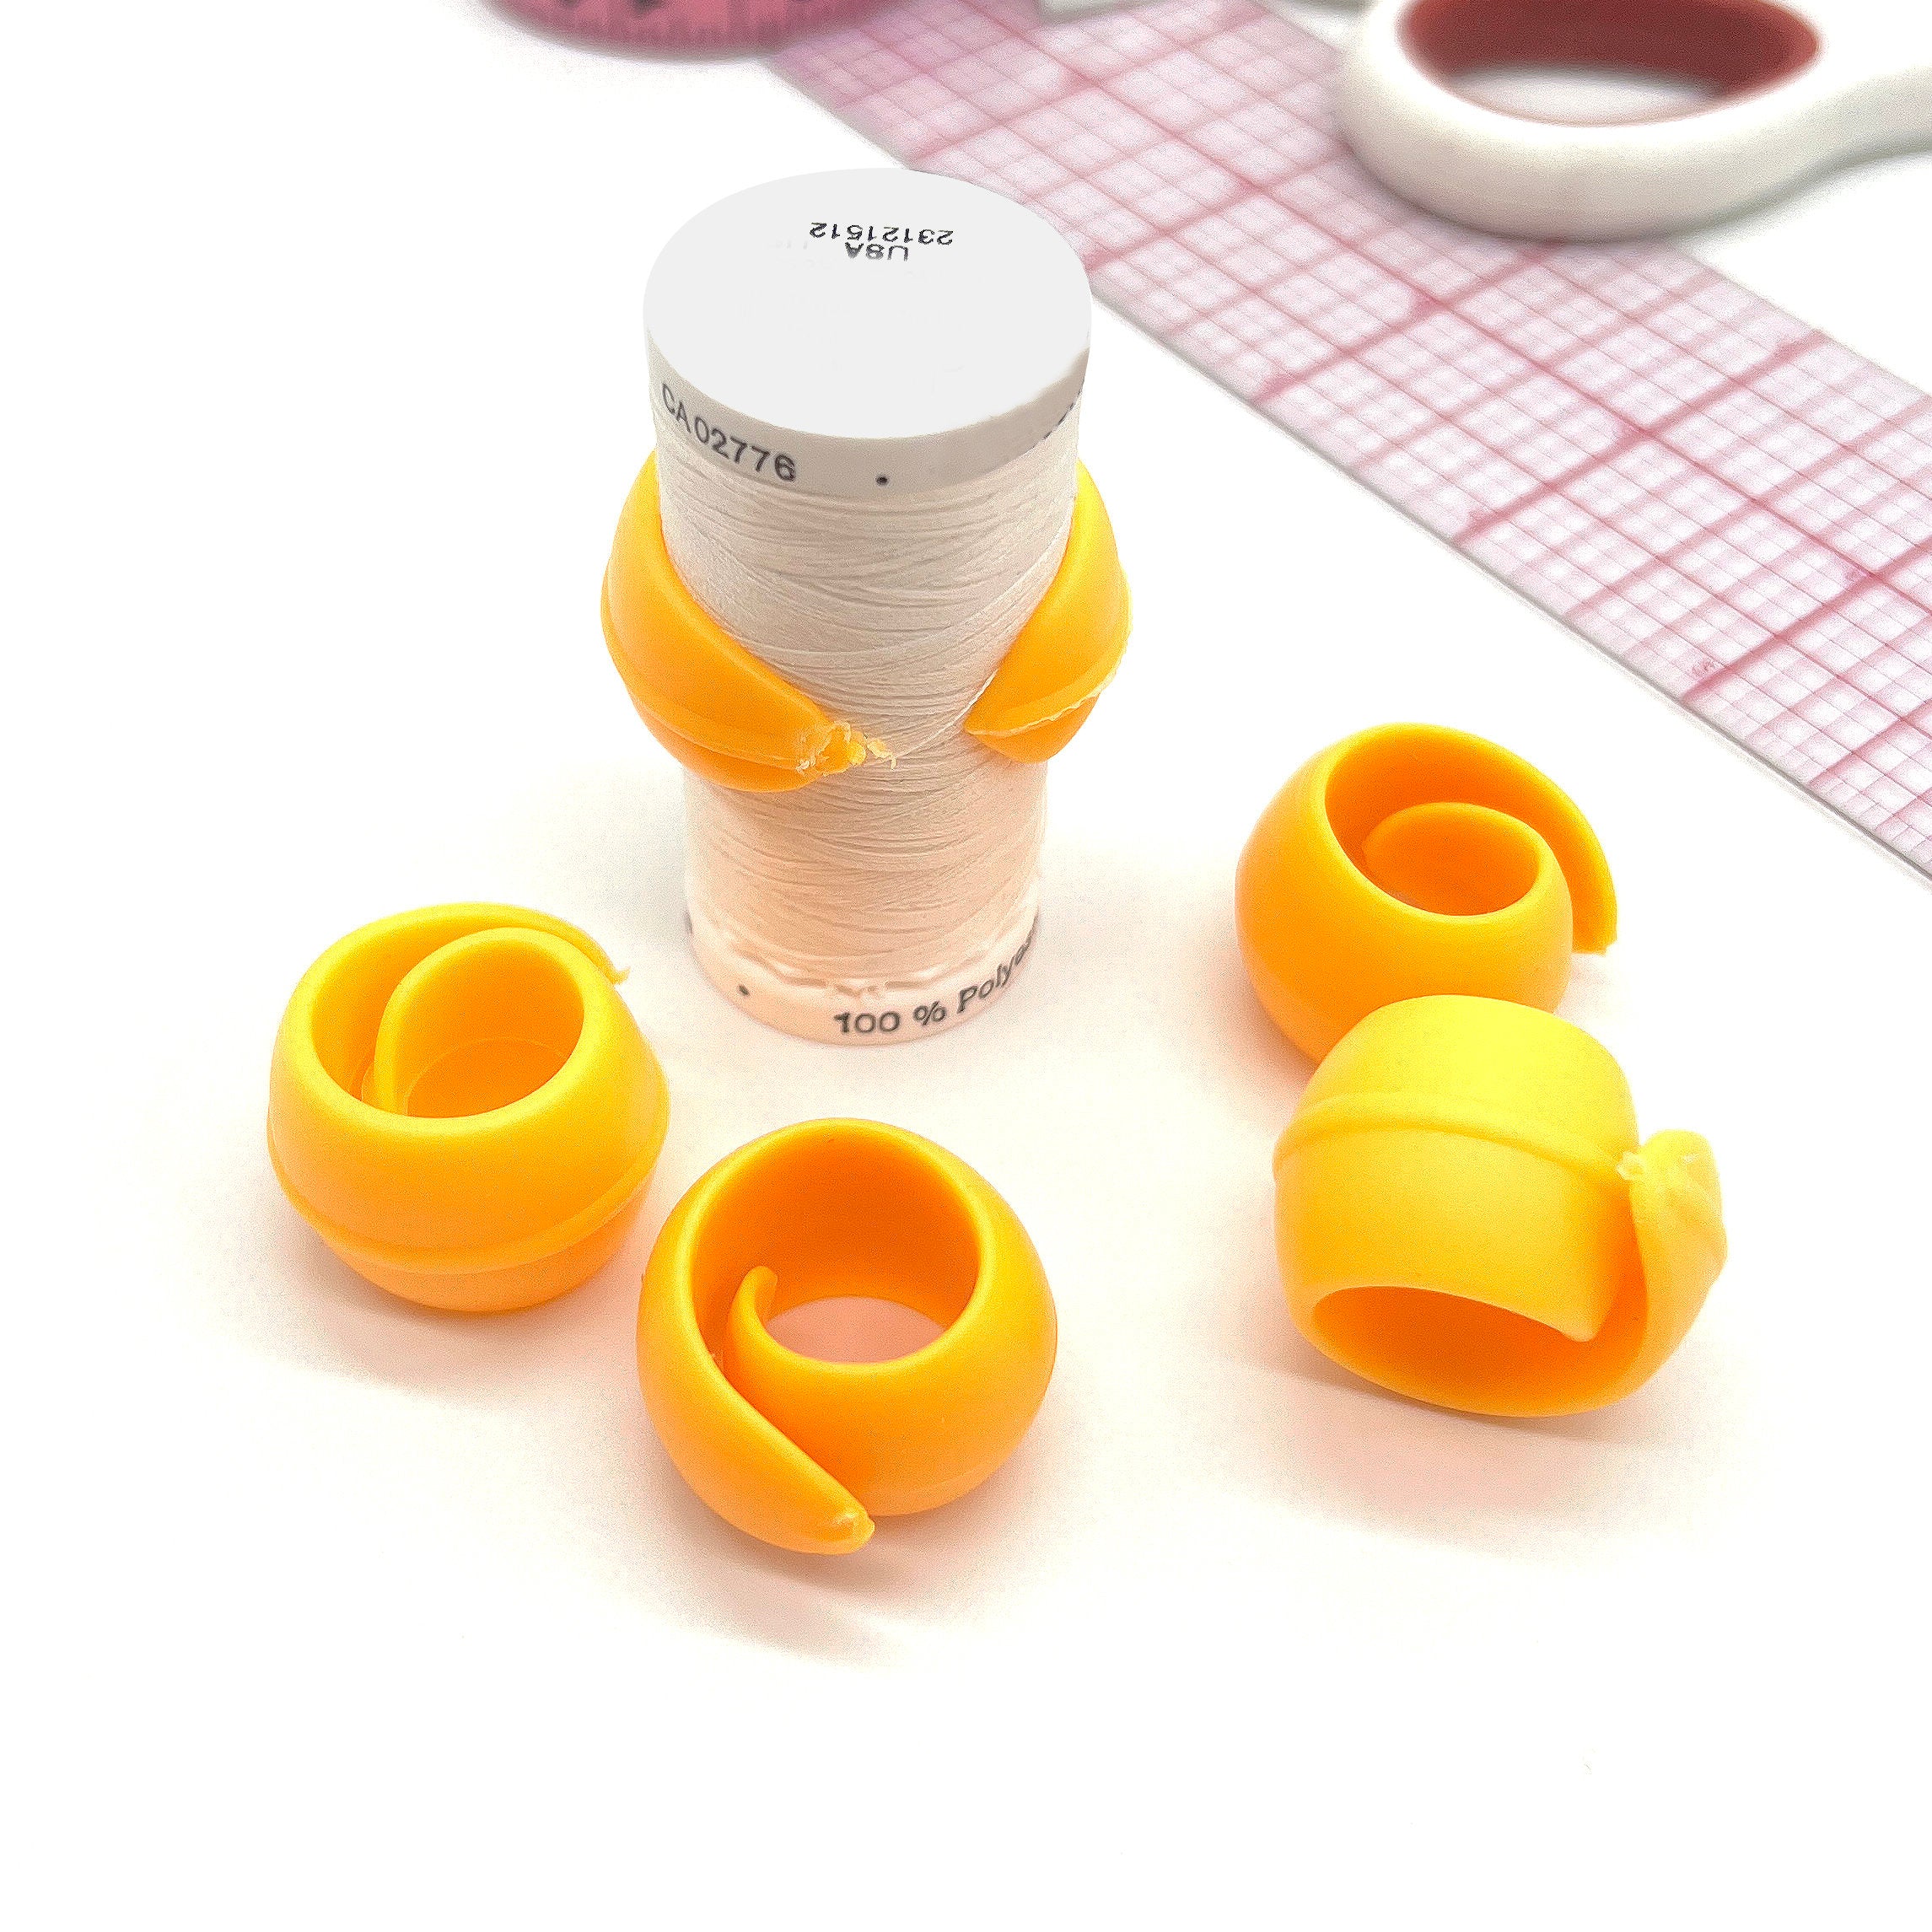 Set of 5 Silicone Spool Holder Bobbin Clamps in 3 colors